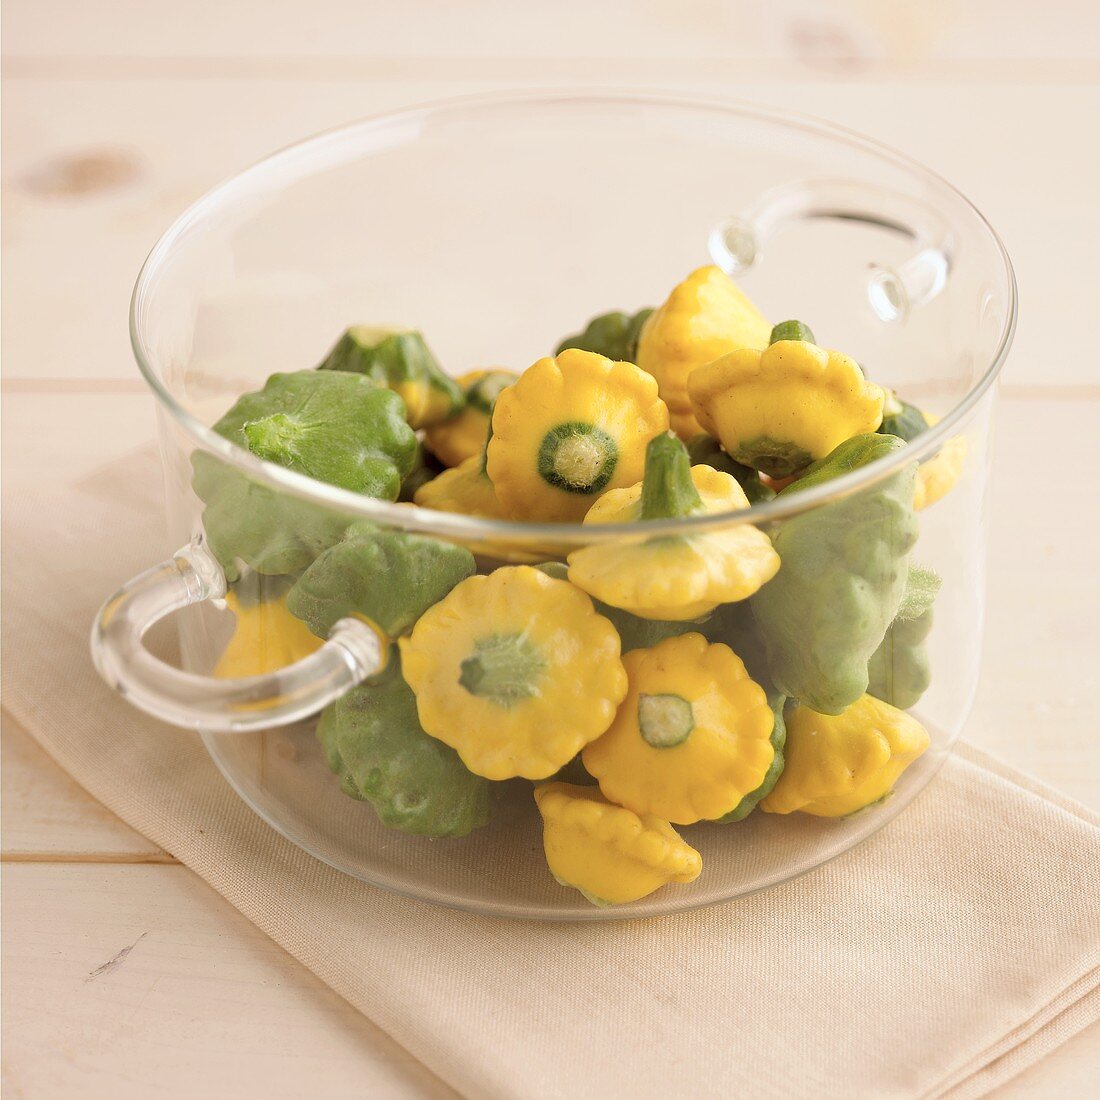 Green and yellow baby patty pan squashes in glass bowl